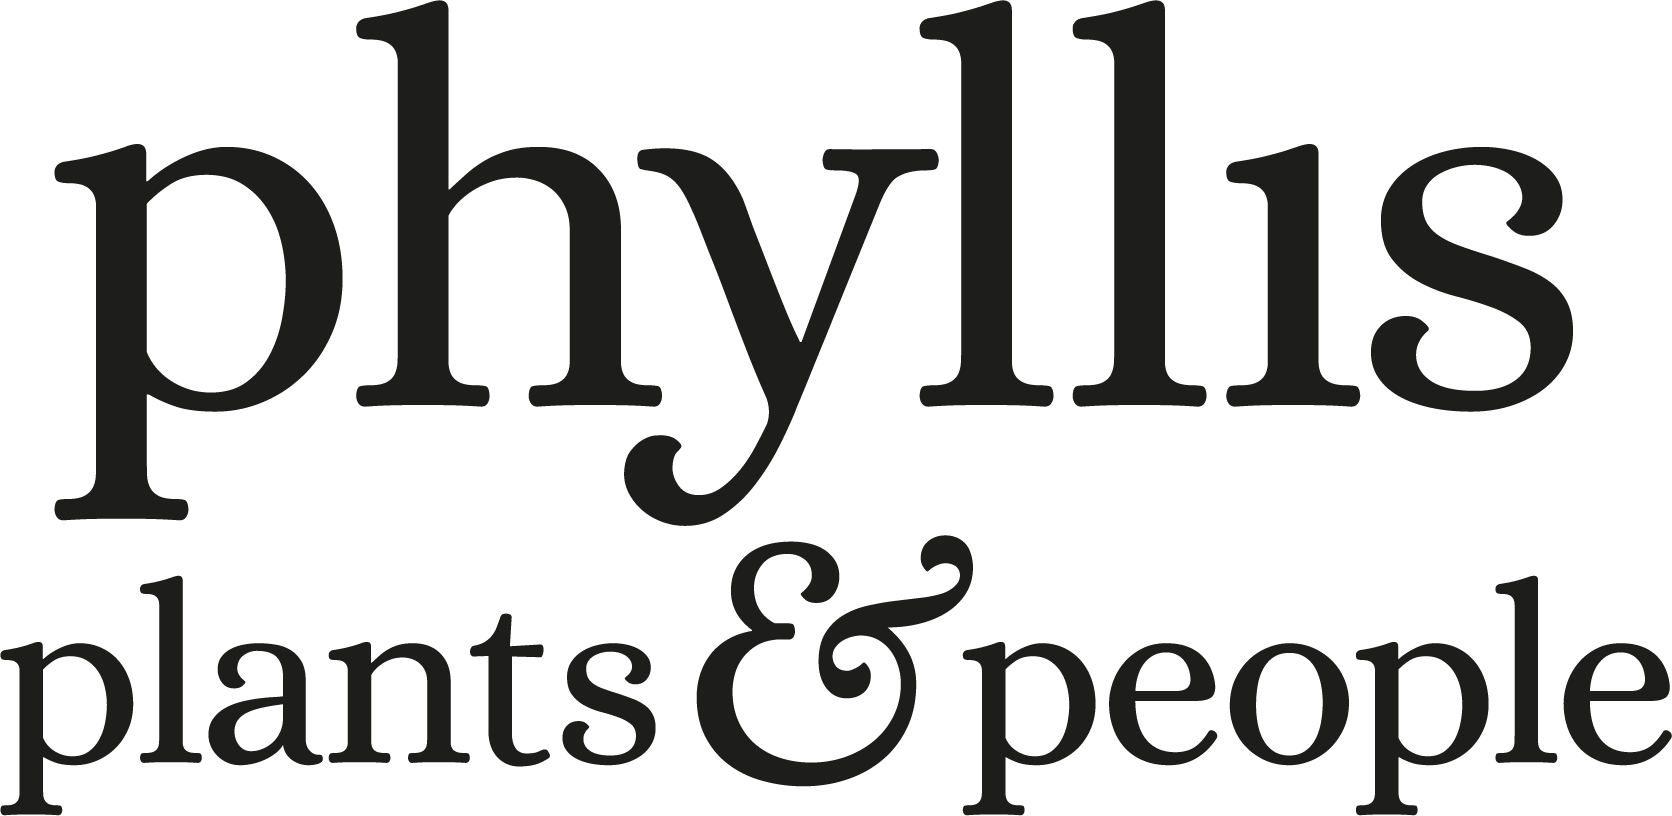 phyllis-plants-and-people-logo